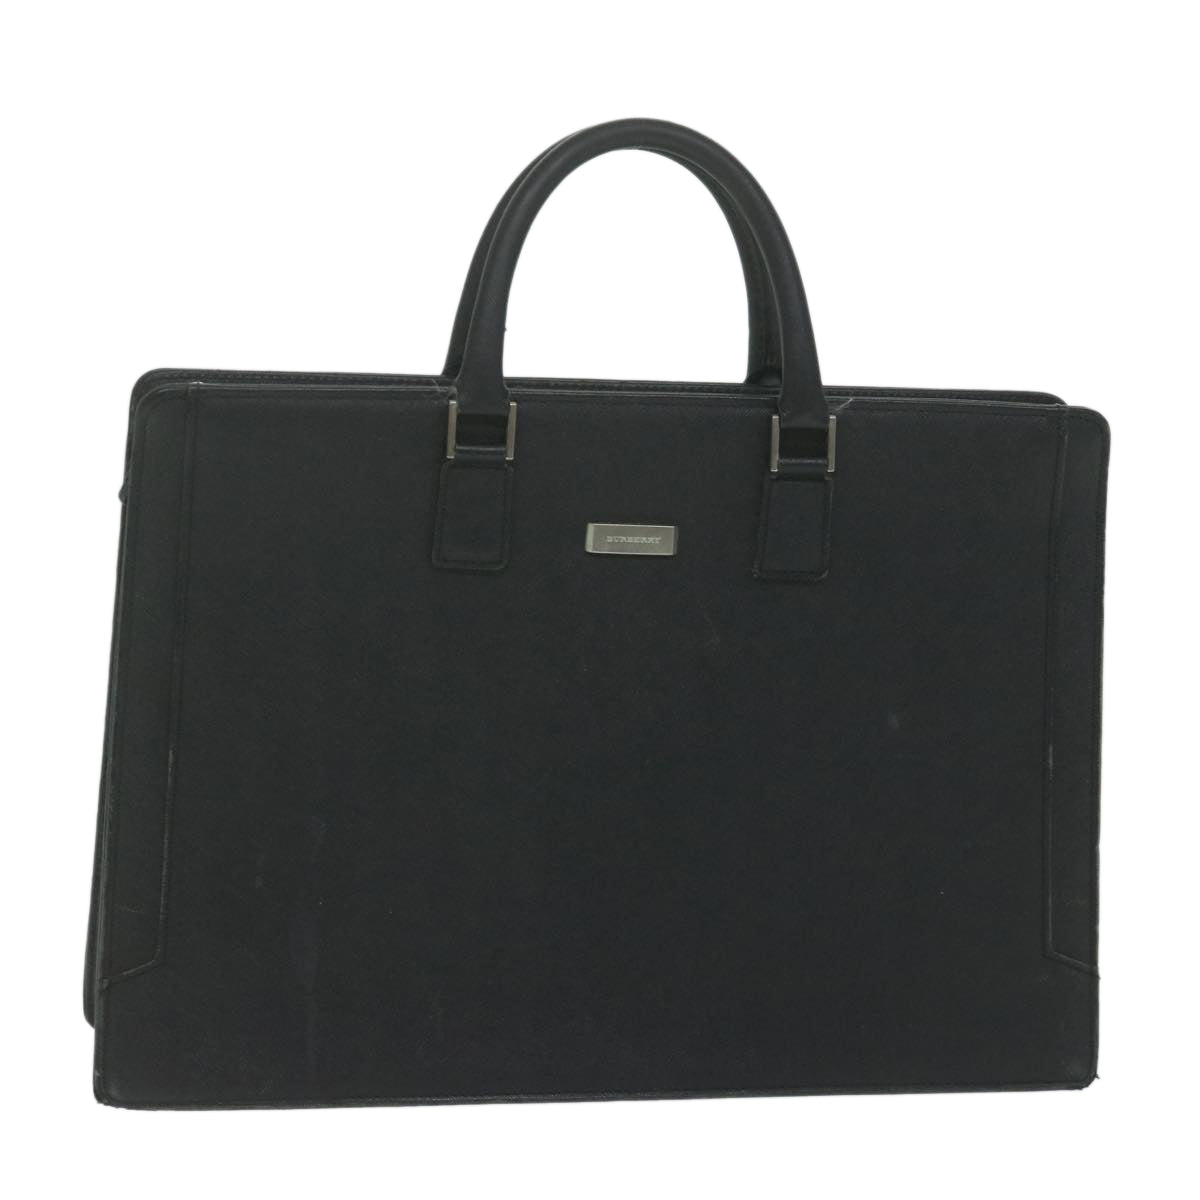 BURBERRY Briefcase Leather Black Auth ep2580